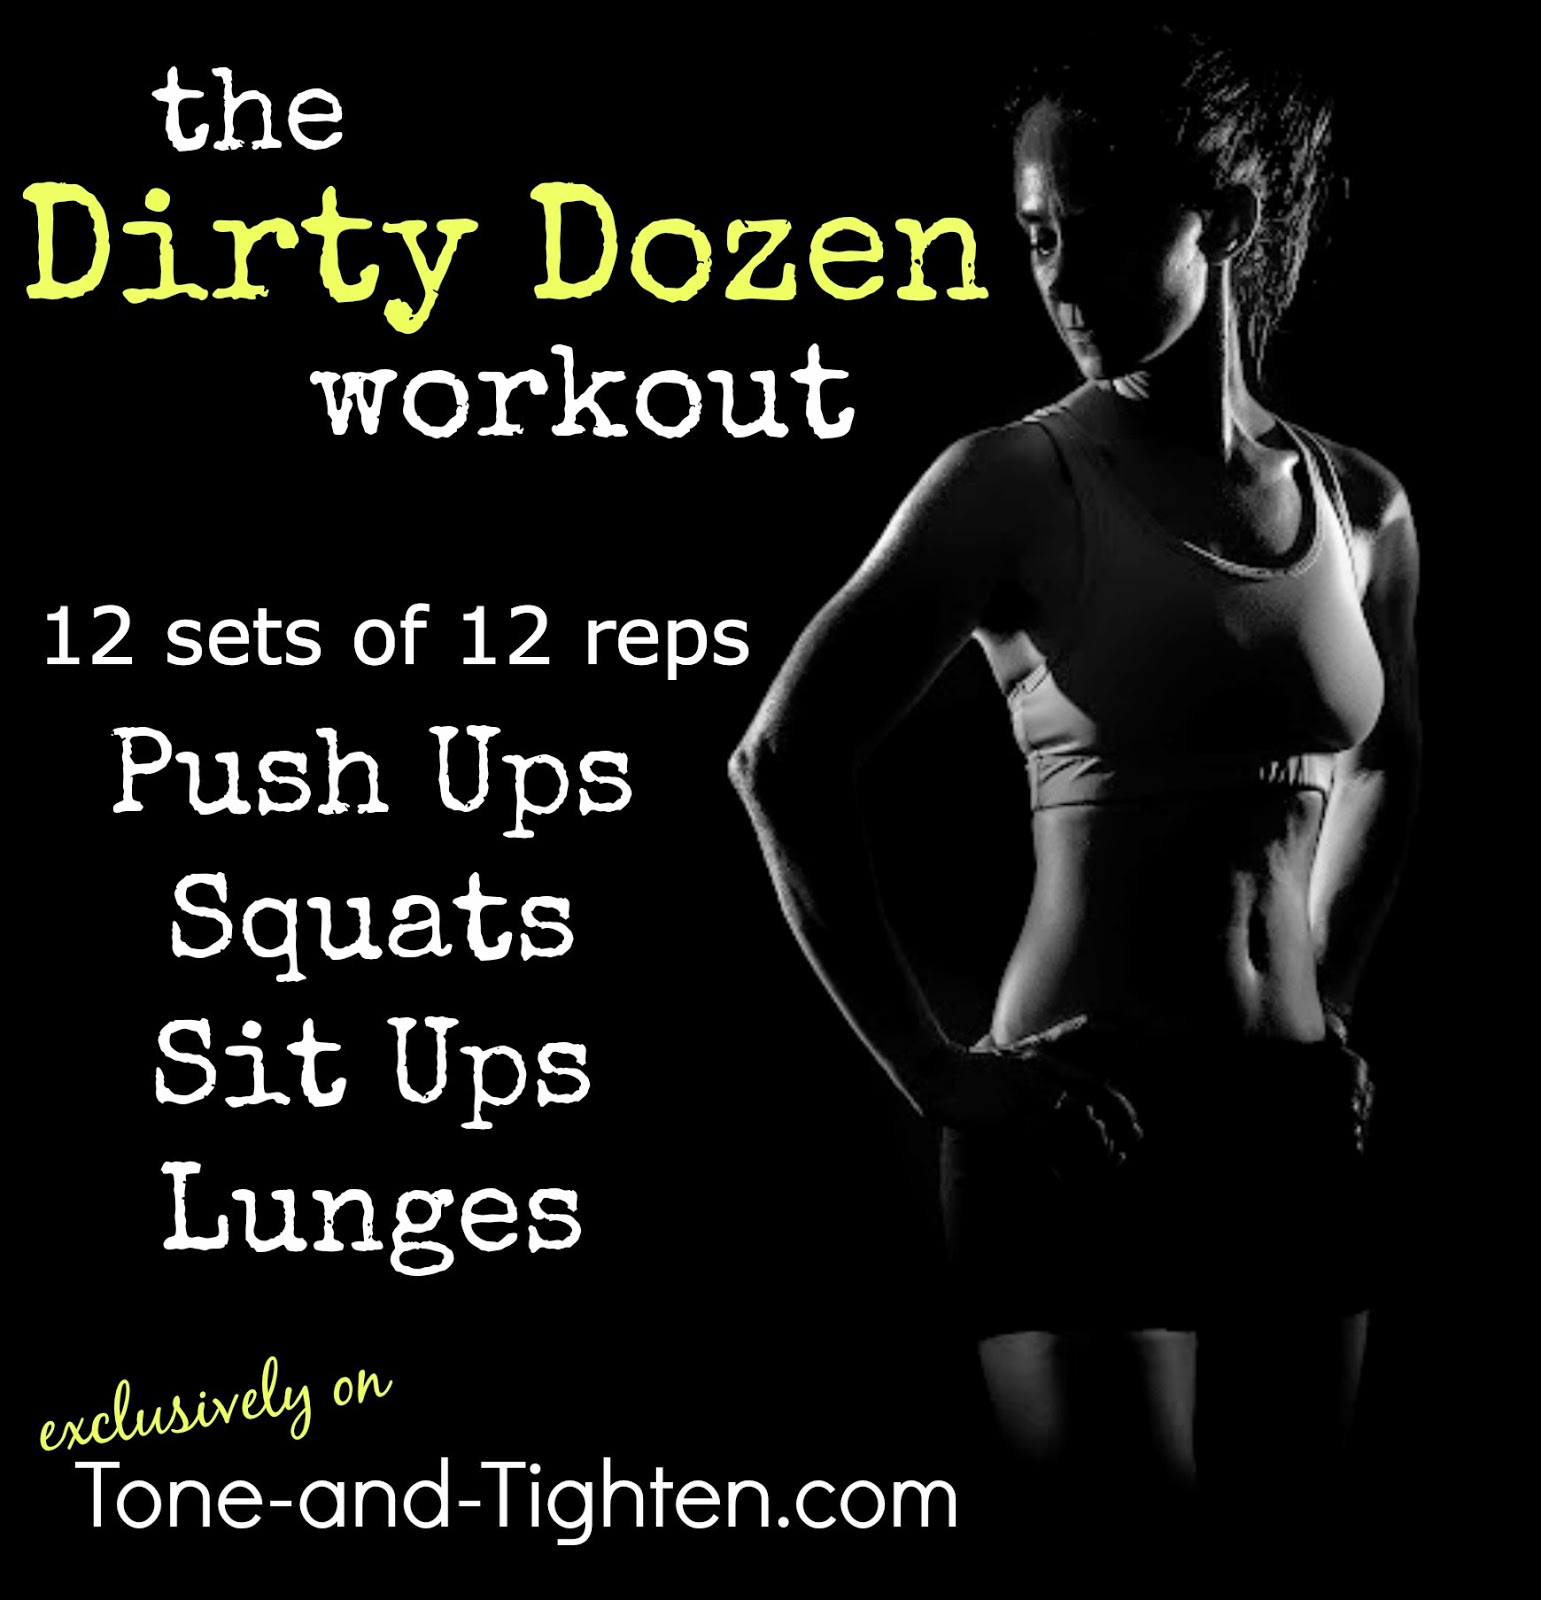 at-home-workout-WOD-dirty-dozen-tone-and